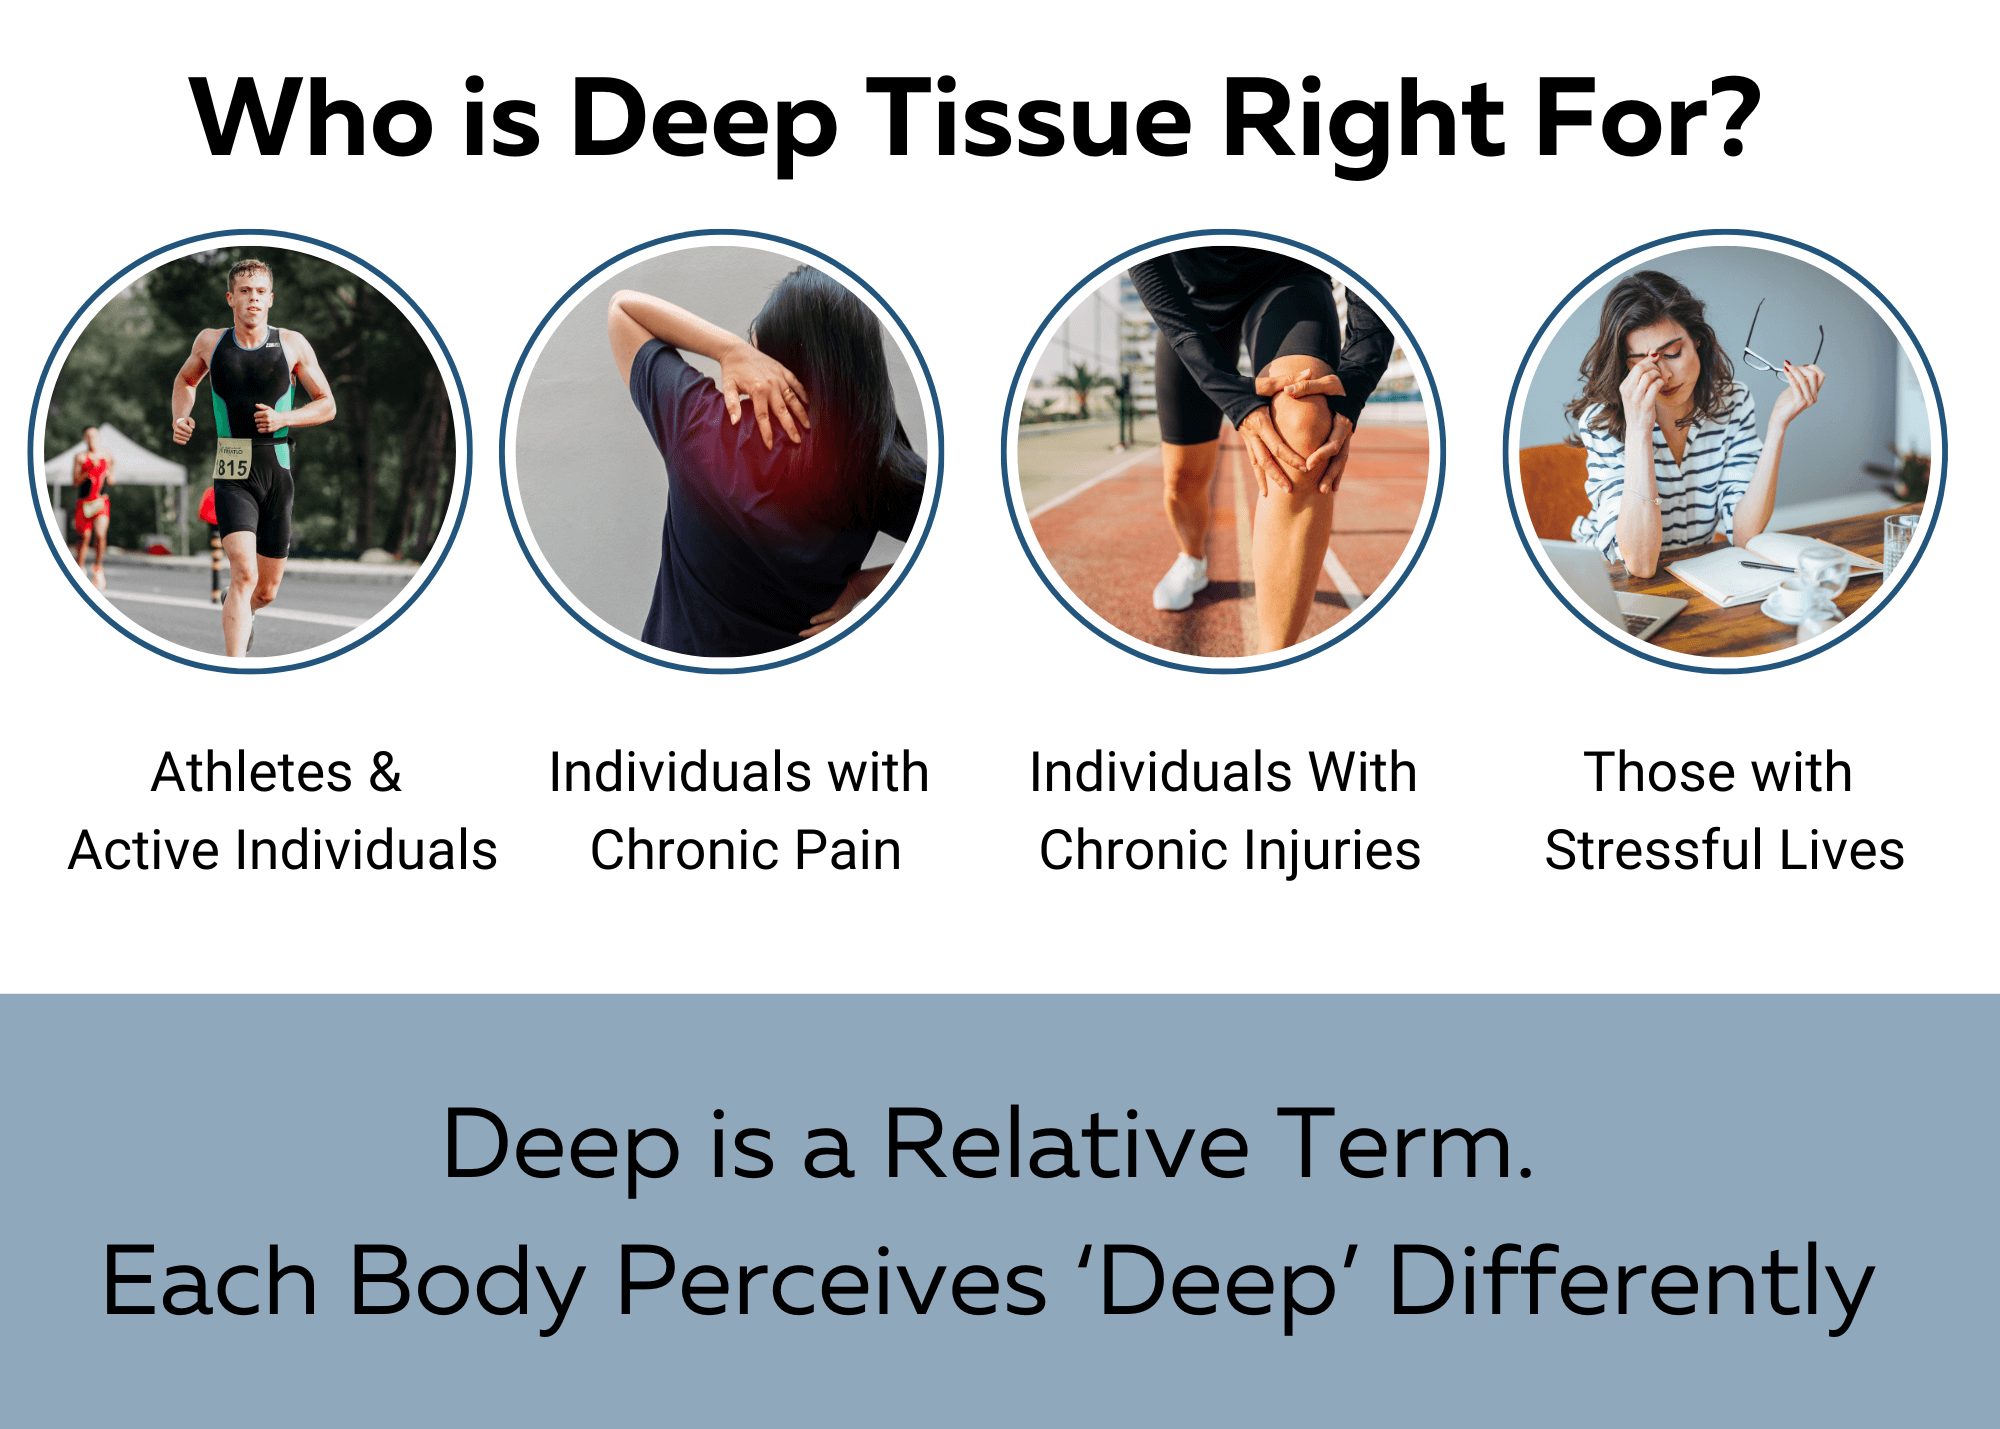 Who can benefit from deep tissue graphic. Has 4 circles with the same visual description as in the text. 